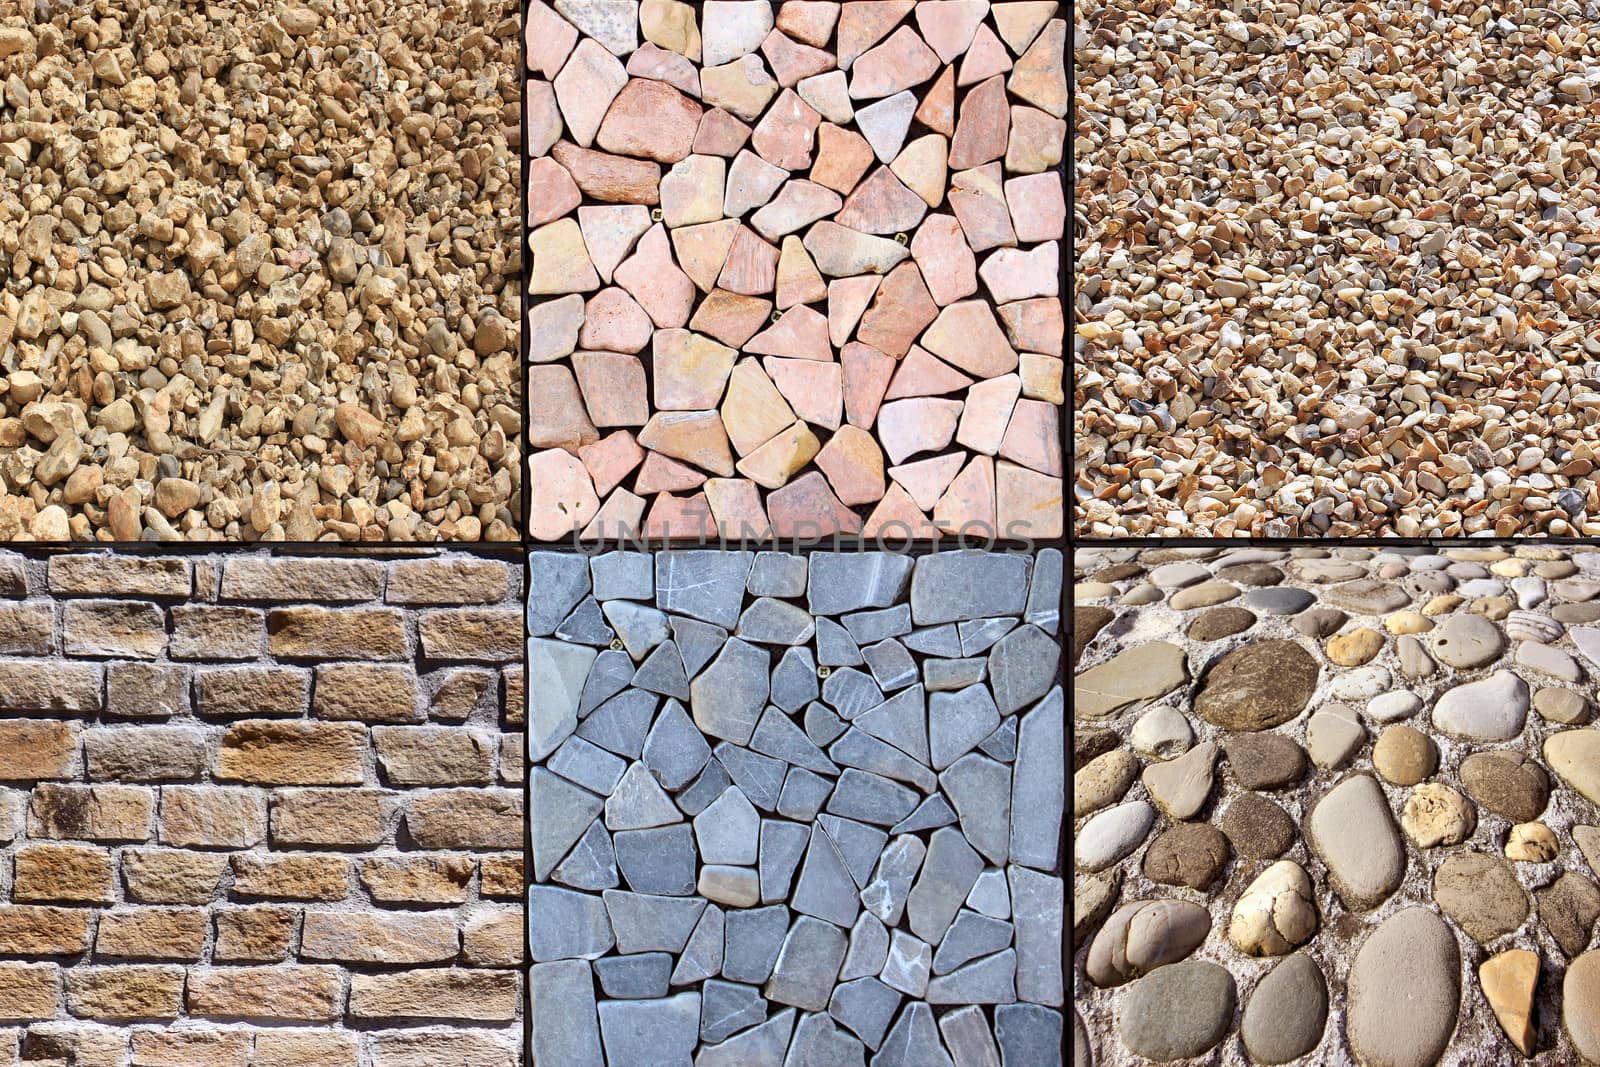 Various natural materials for coating a driveway, path or trail ride